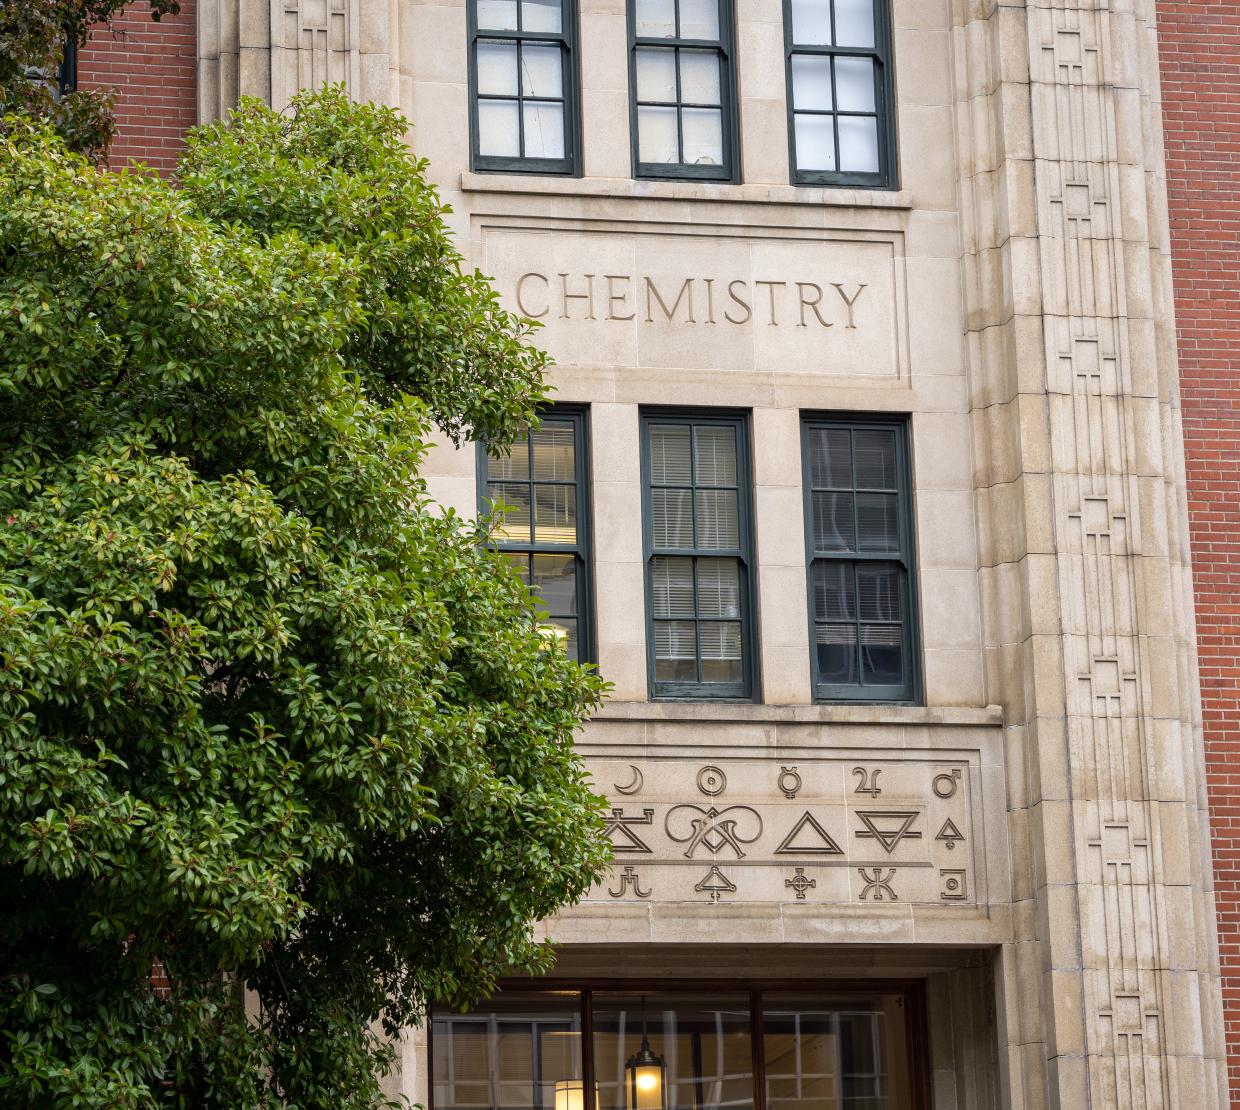 A brick building with the word "chemistry" stands behind a green tree.